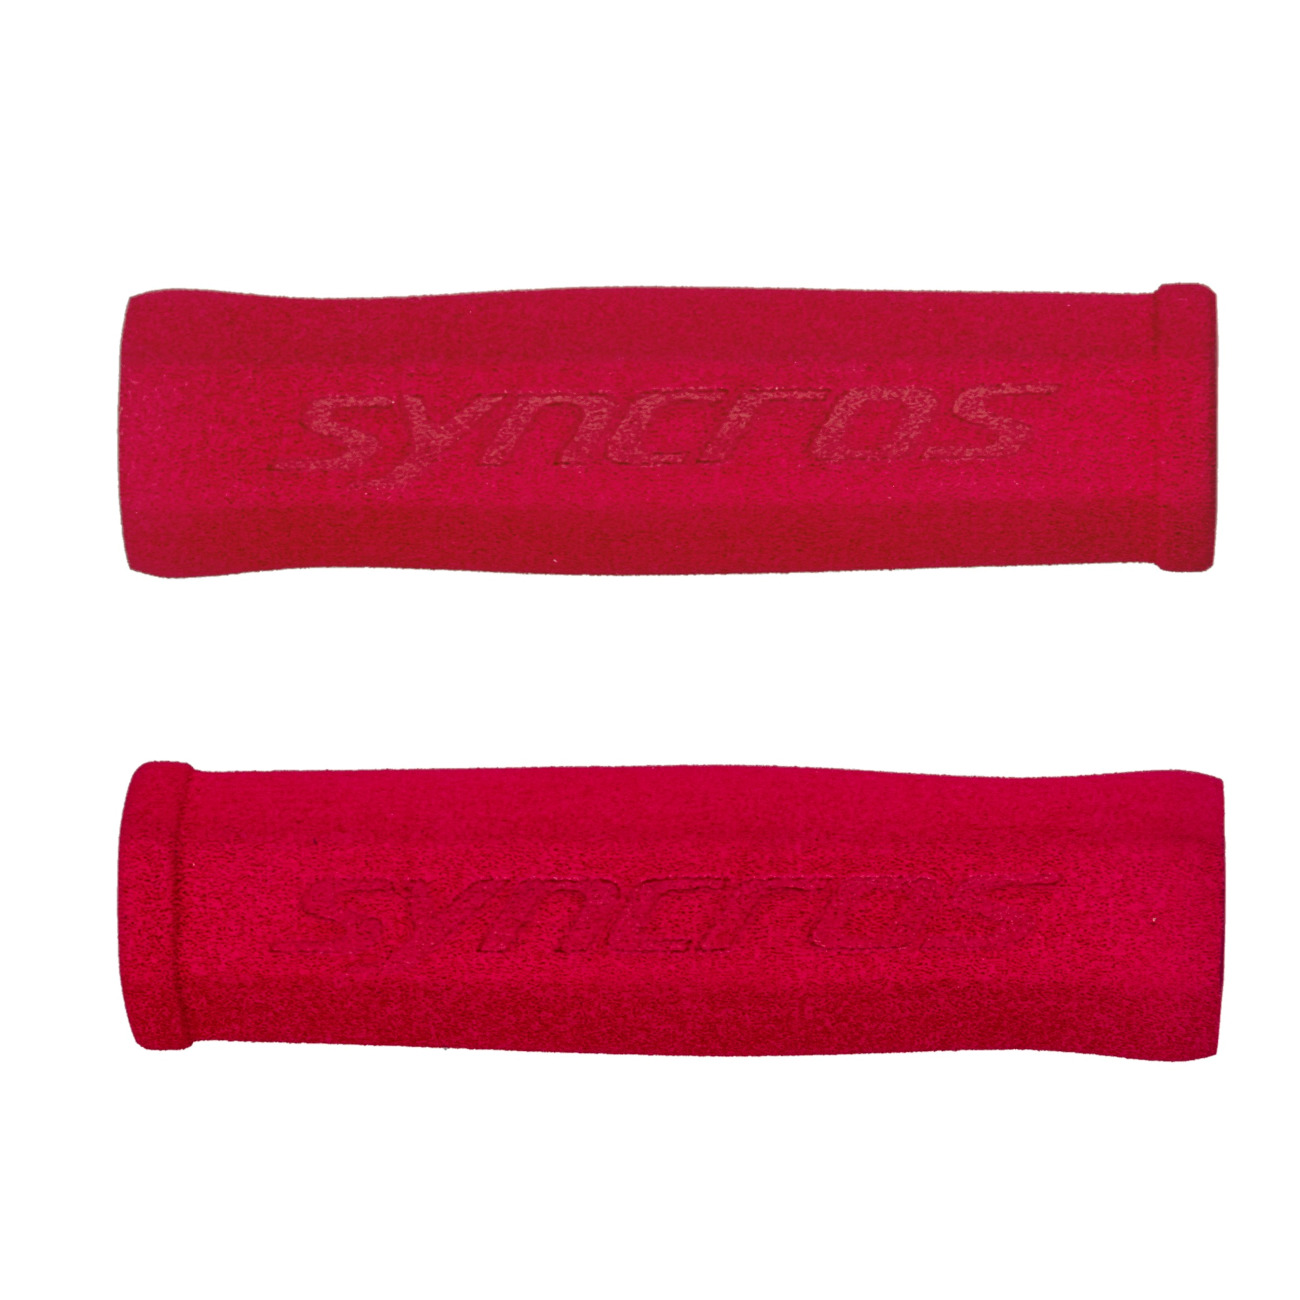 Image of Syncros Foam Grips - florida red